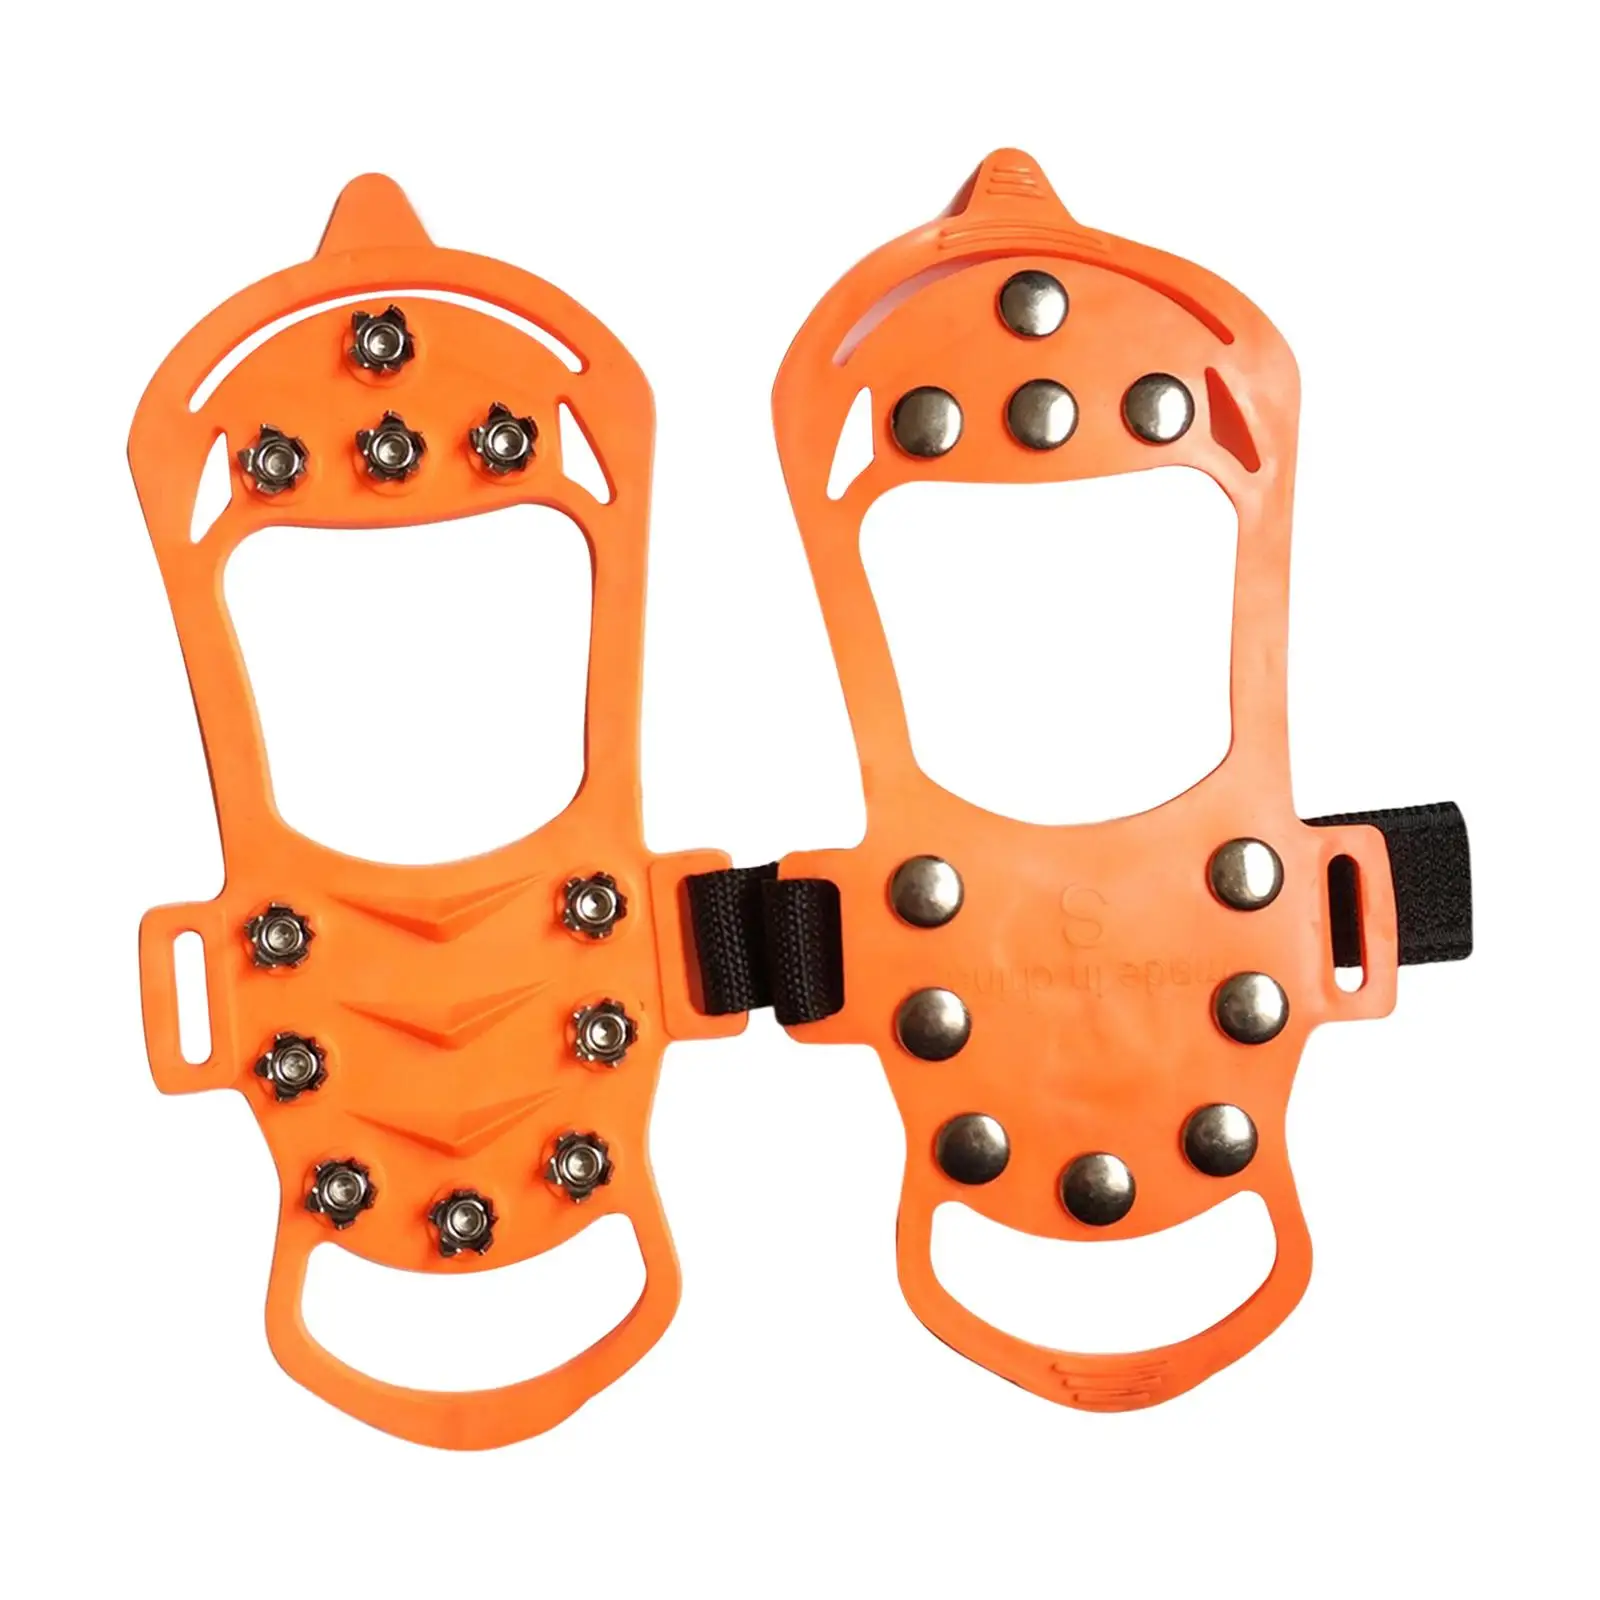 Non Slip 11 Spikes Crampons Easy wearing Ice Snow Grips for Winter Hiking